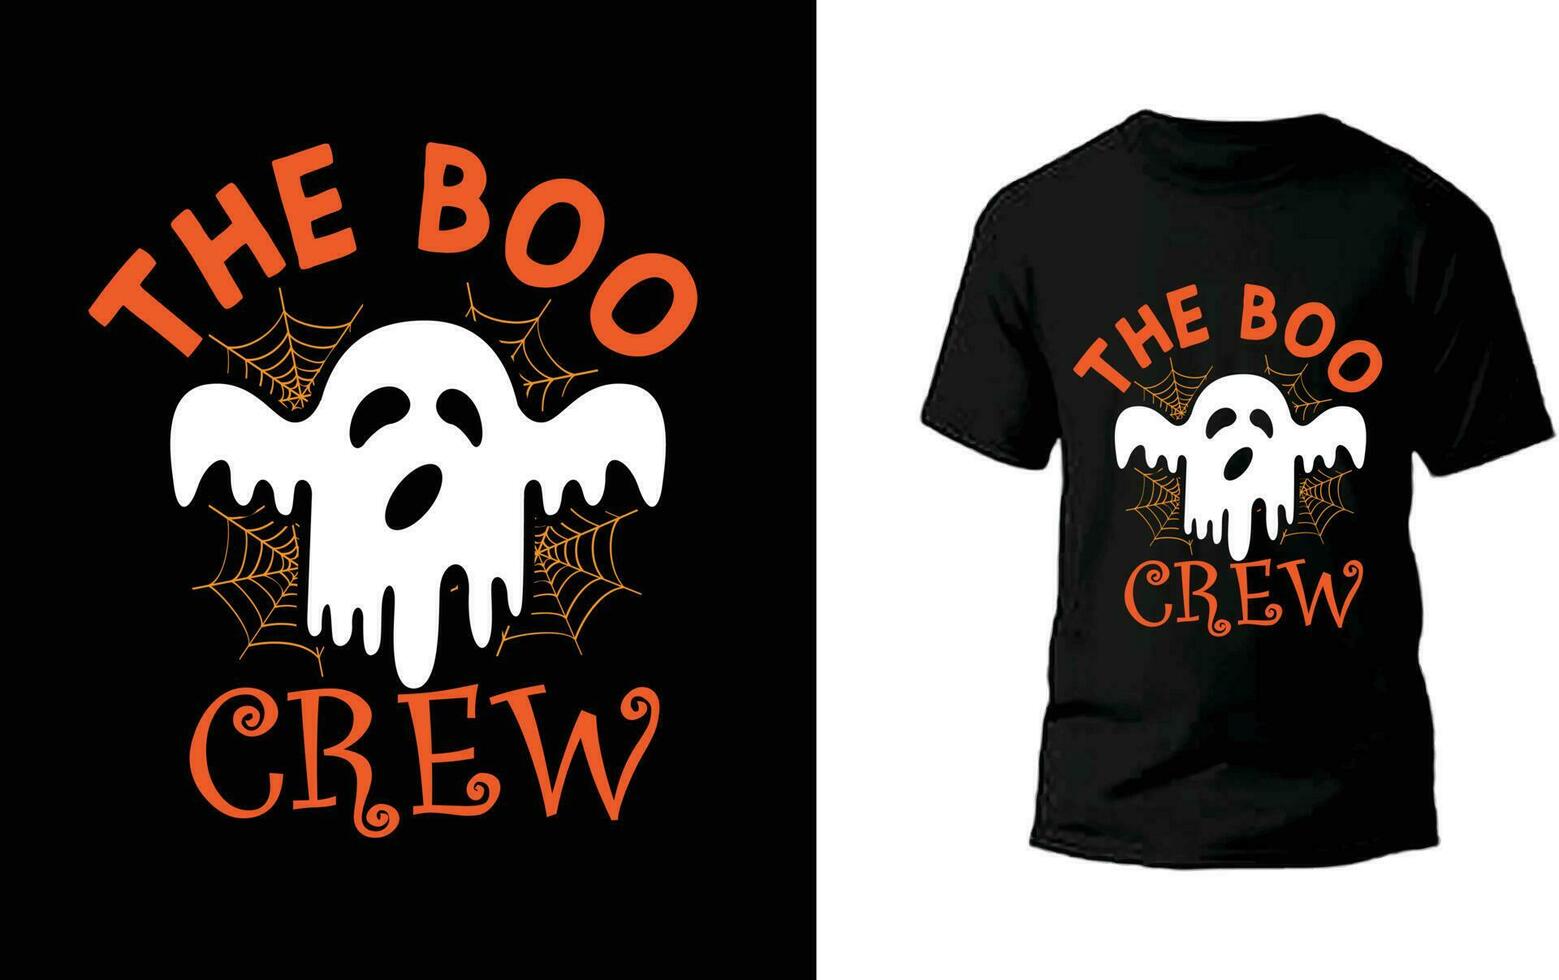 Haloween Vector and Halloween t shirt design with Background, Poster, and Banner design for Halloween